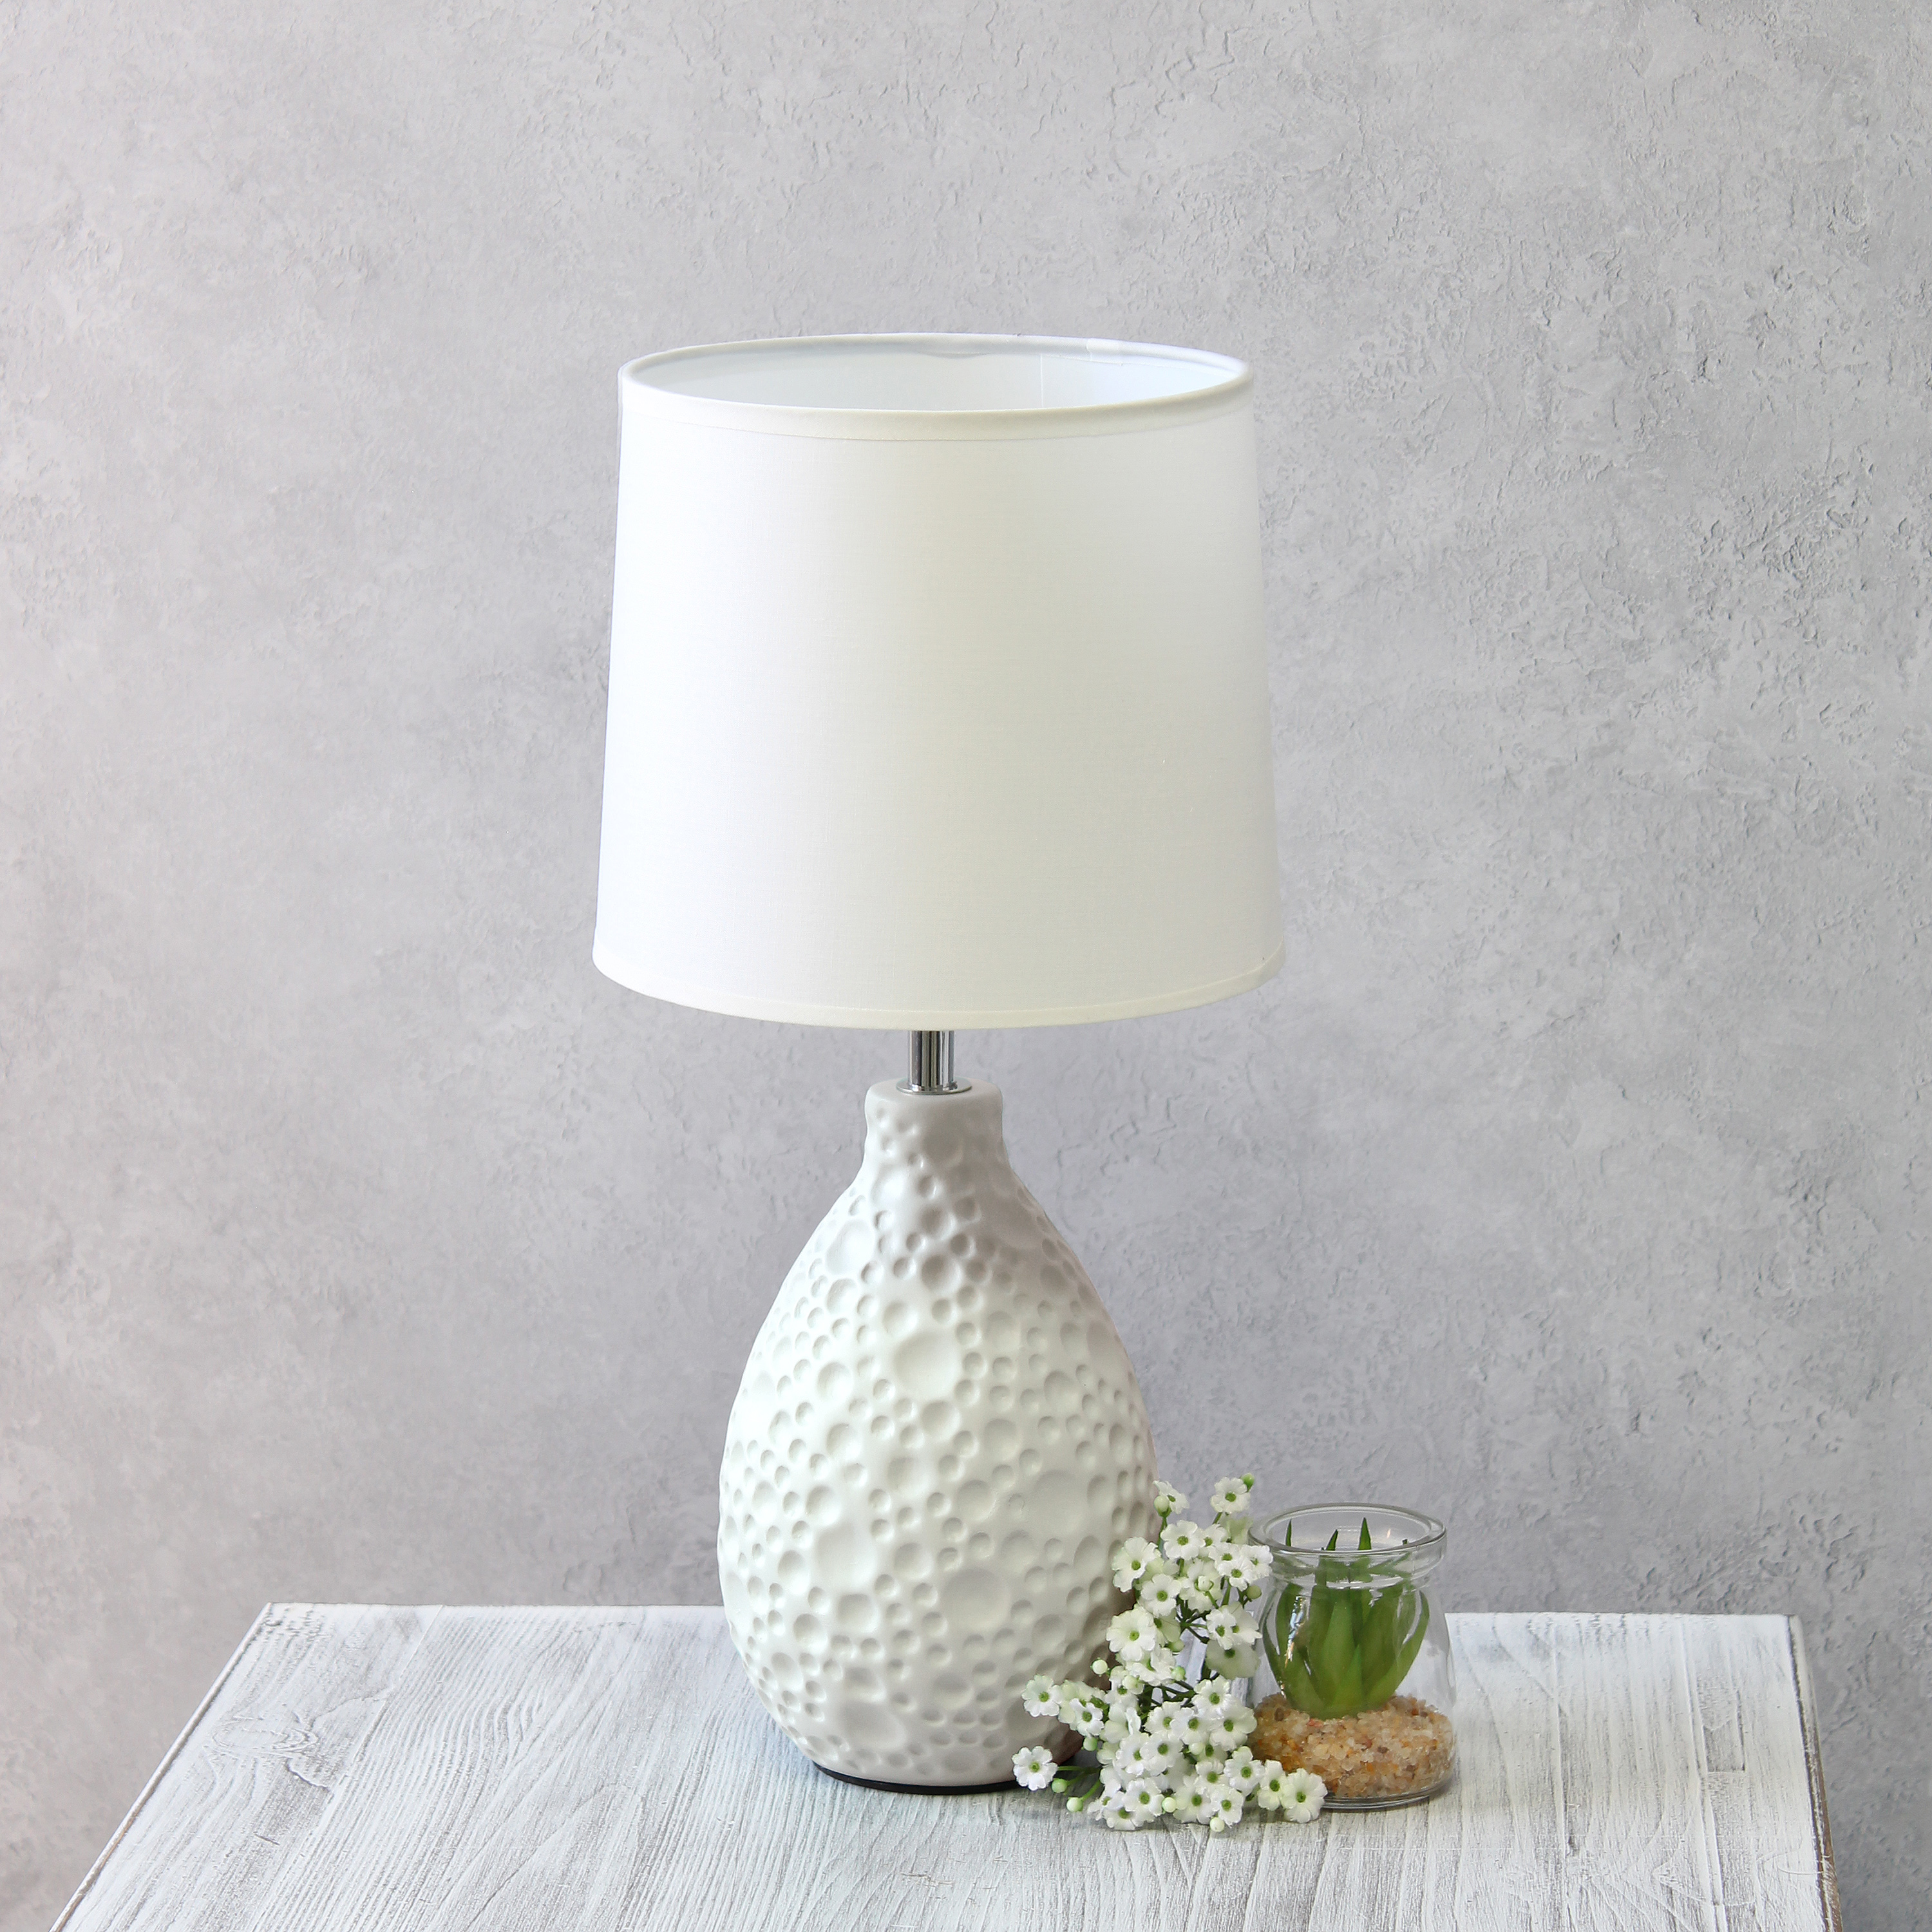 Simple Designs Textured Stucco Ceramic Oval Table Lamp - image 5 of 8